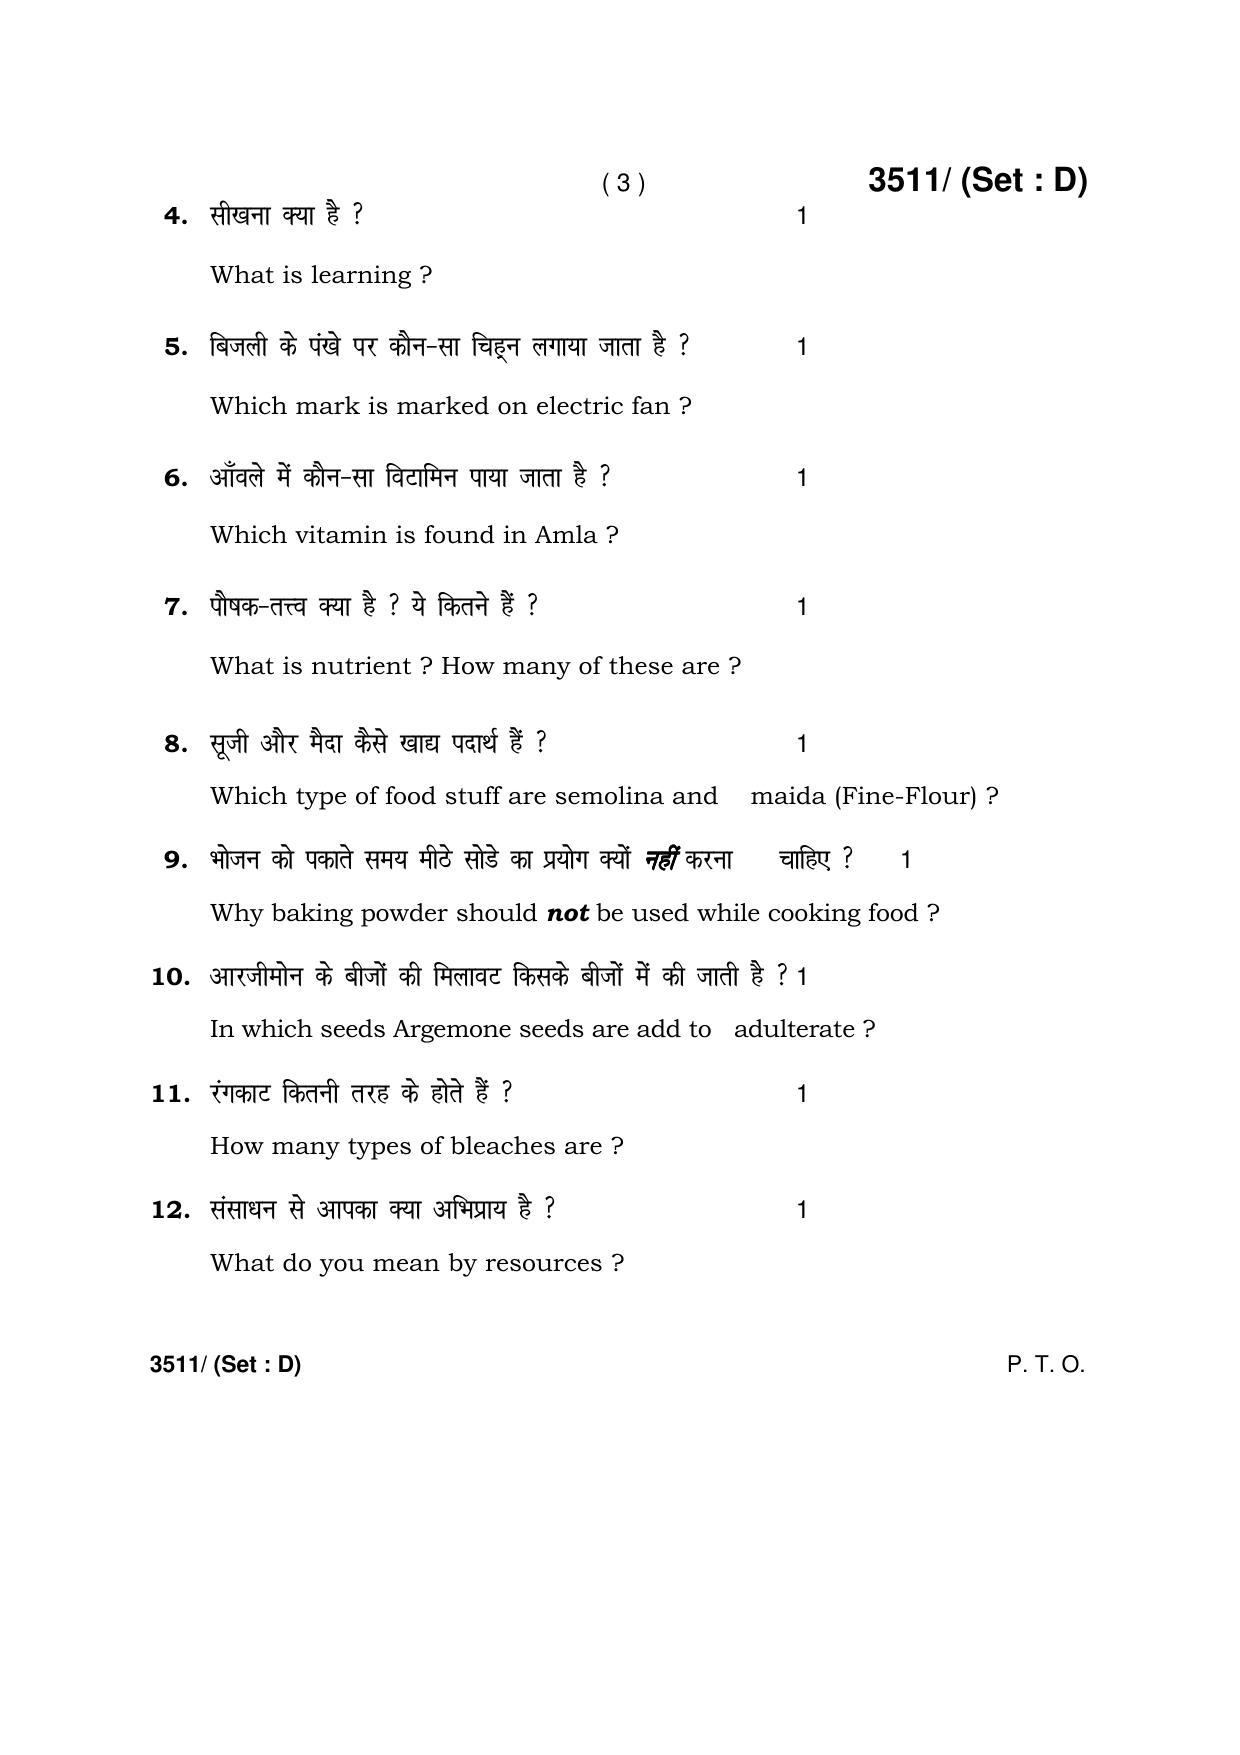 Haryana Board HBSE Class 10 Home Science -D 2018 Question Paper - Page 3